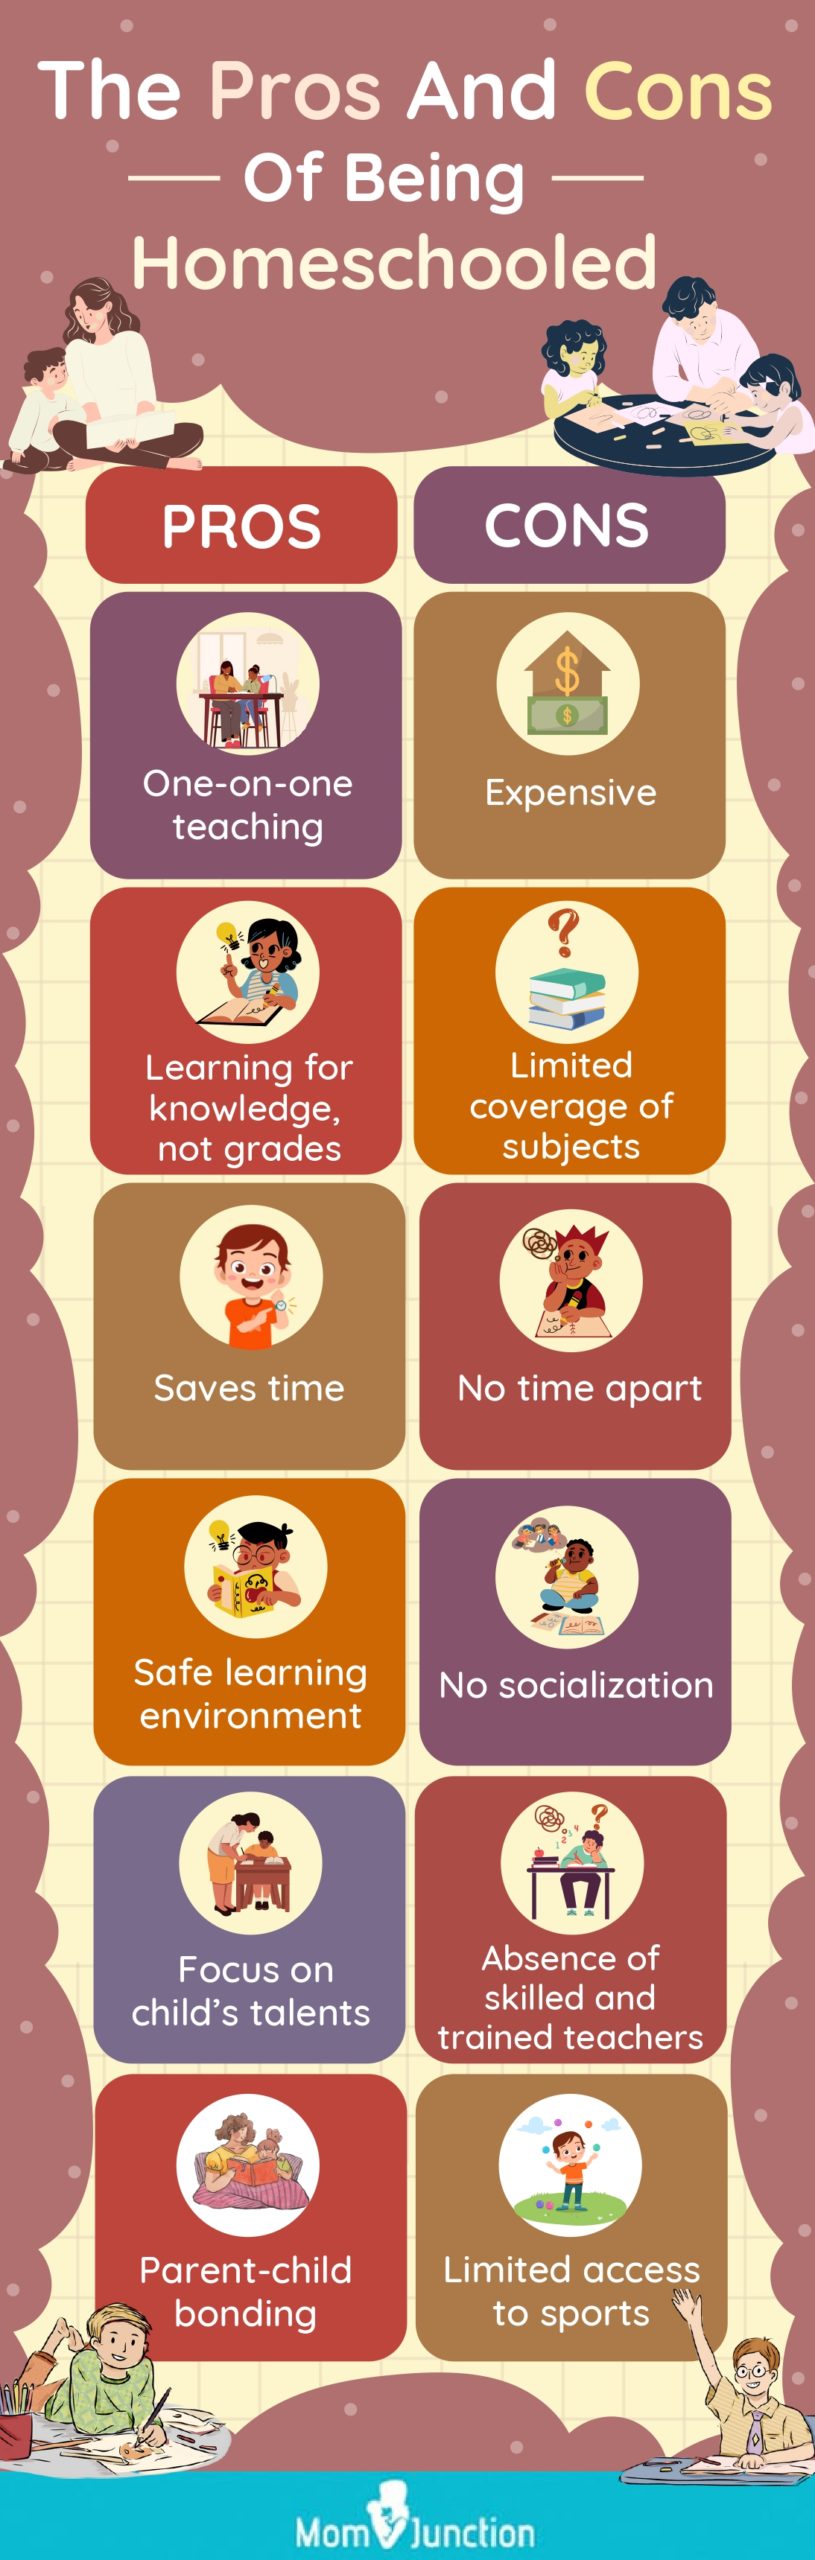 the pros and cons of being homeschooled (infographic)